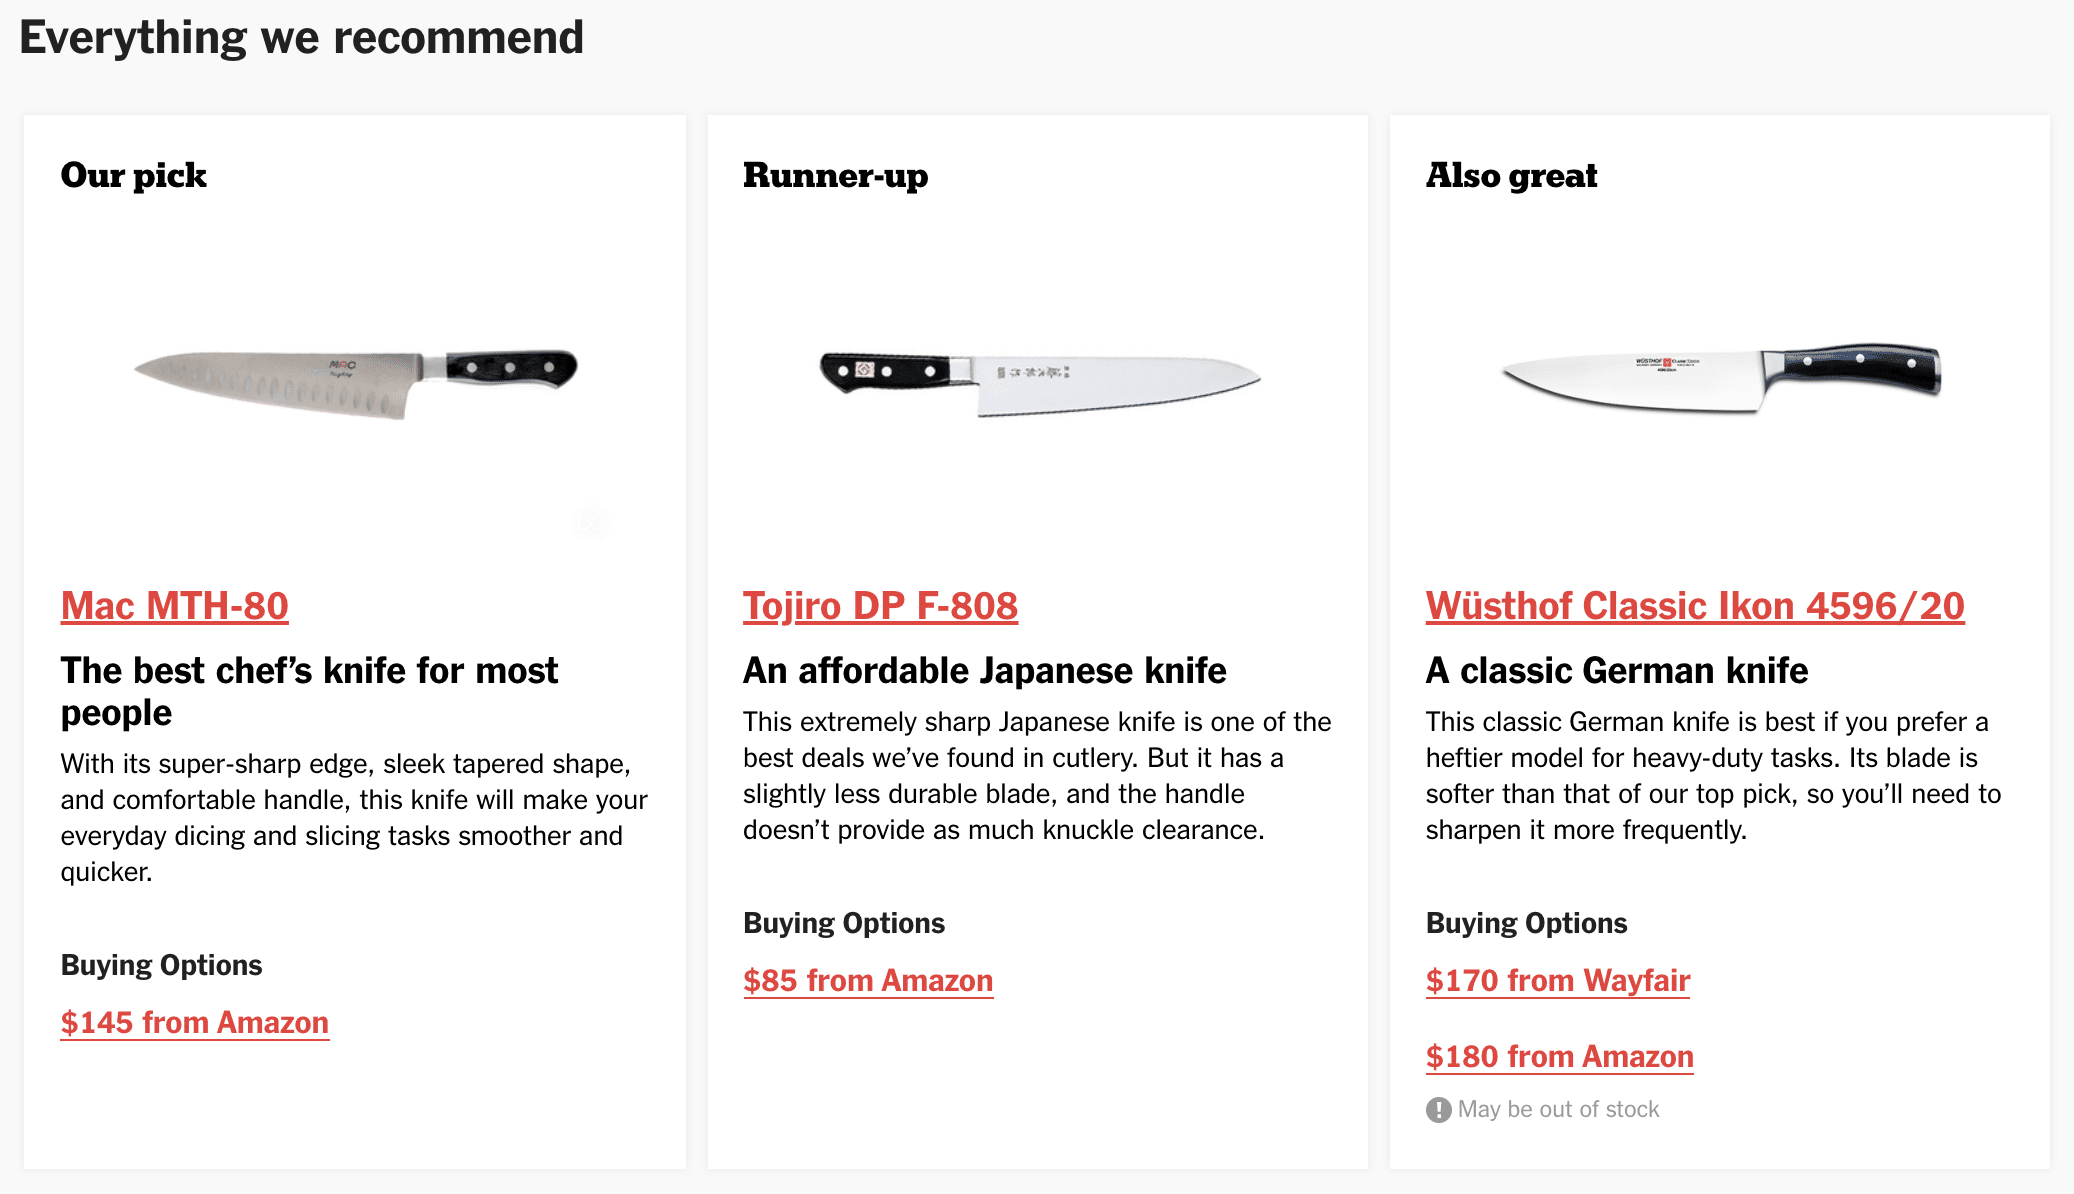 wirecutter example of a comparison table with three different types of knives